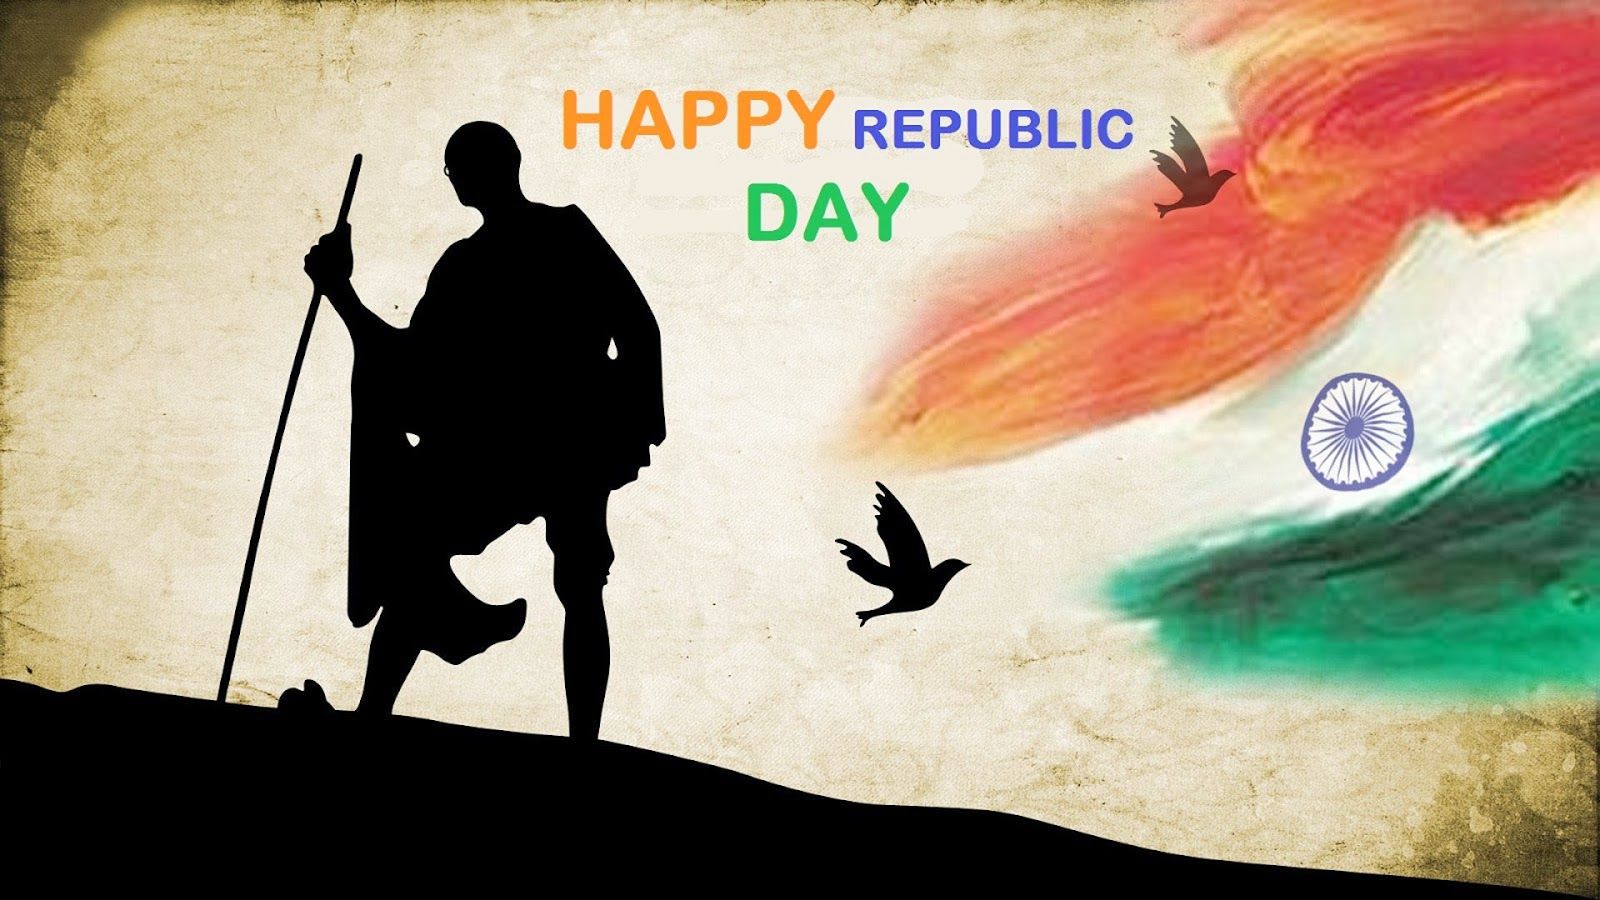 Happy Republic Day Image Free Download. Happy Republic Day 2021 Image, Sms, Quotes, Wishes, Wallpaper, Shayri, Messages